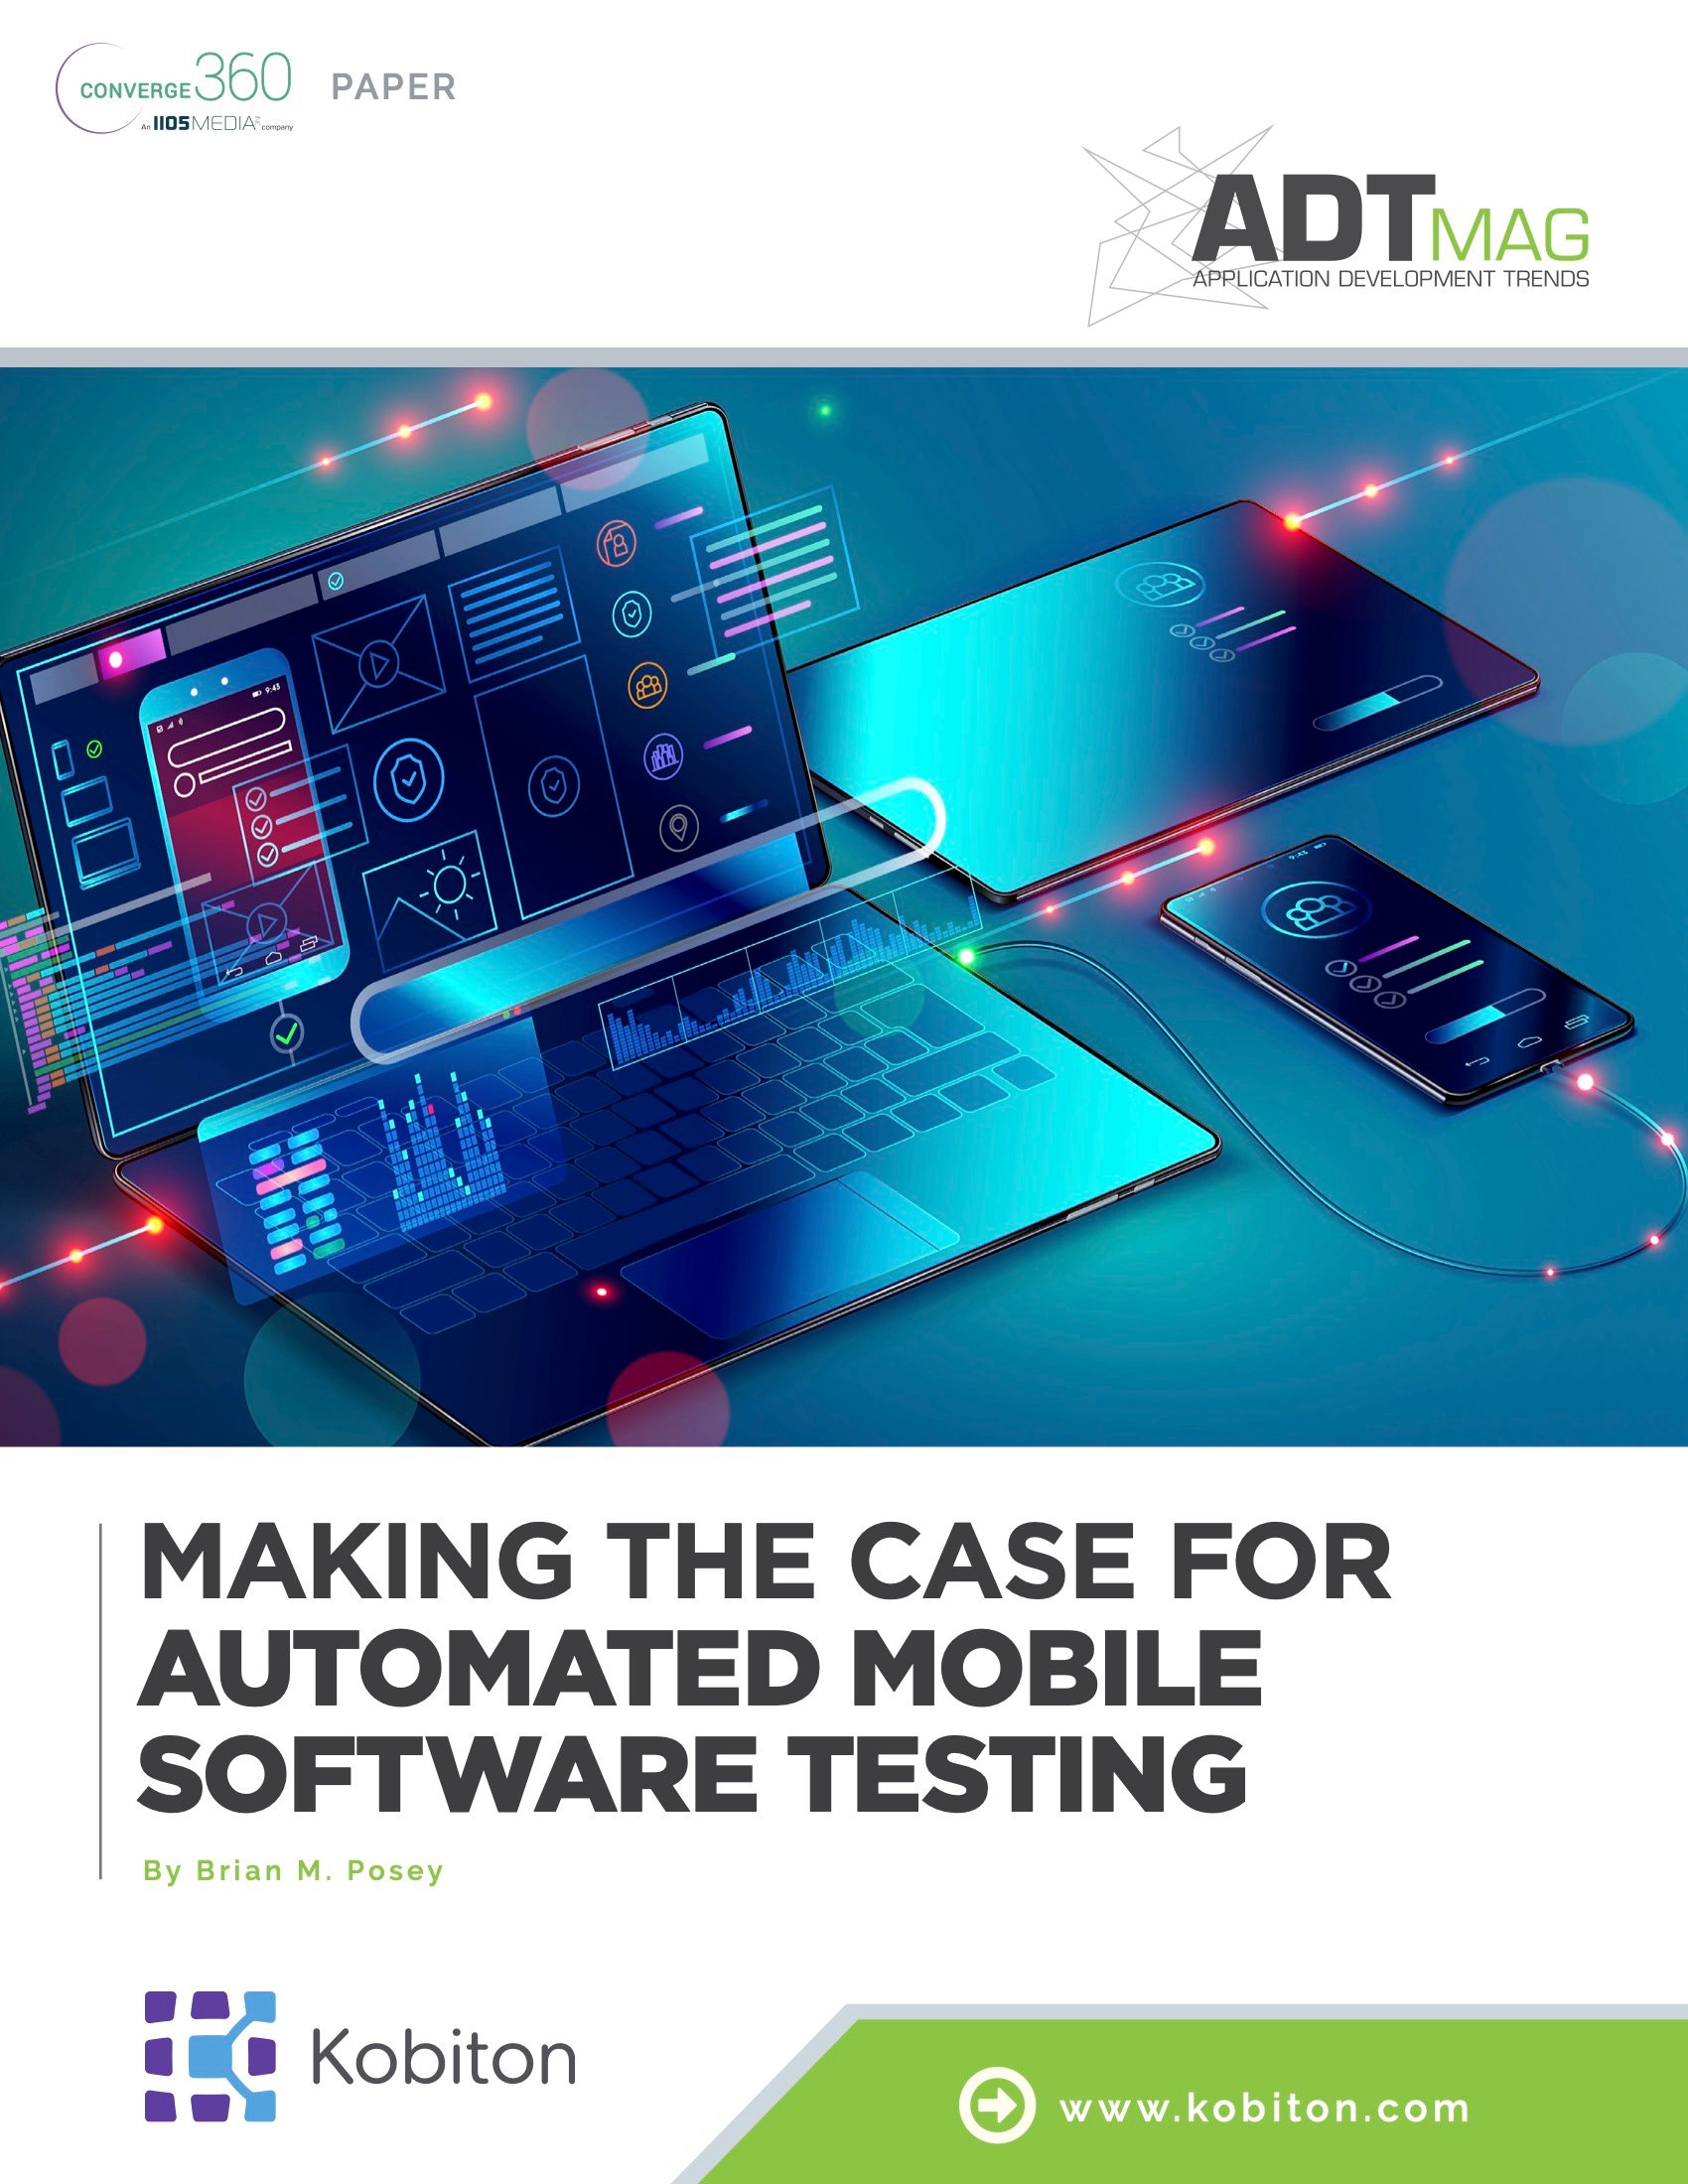 ADTMag Techtalk - Making the Case for Automated Mobile Software Testing